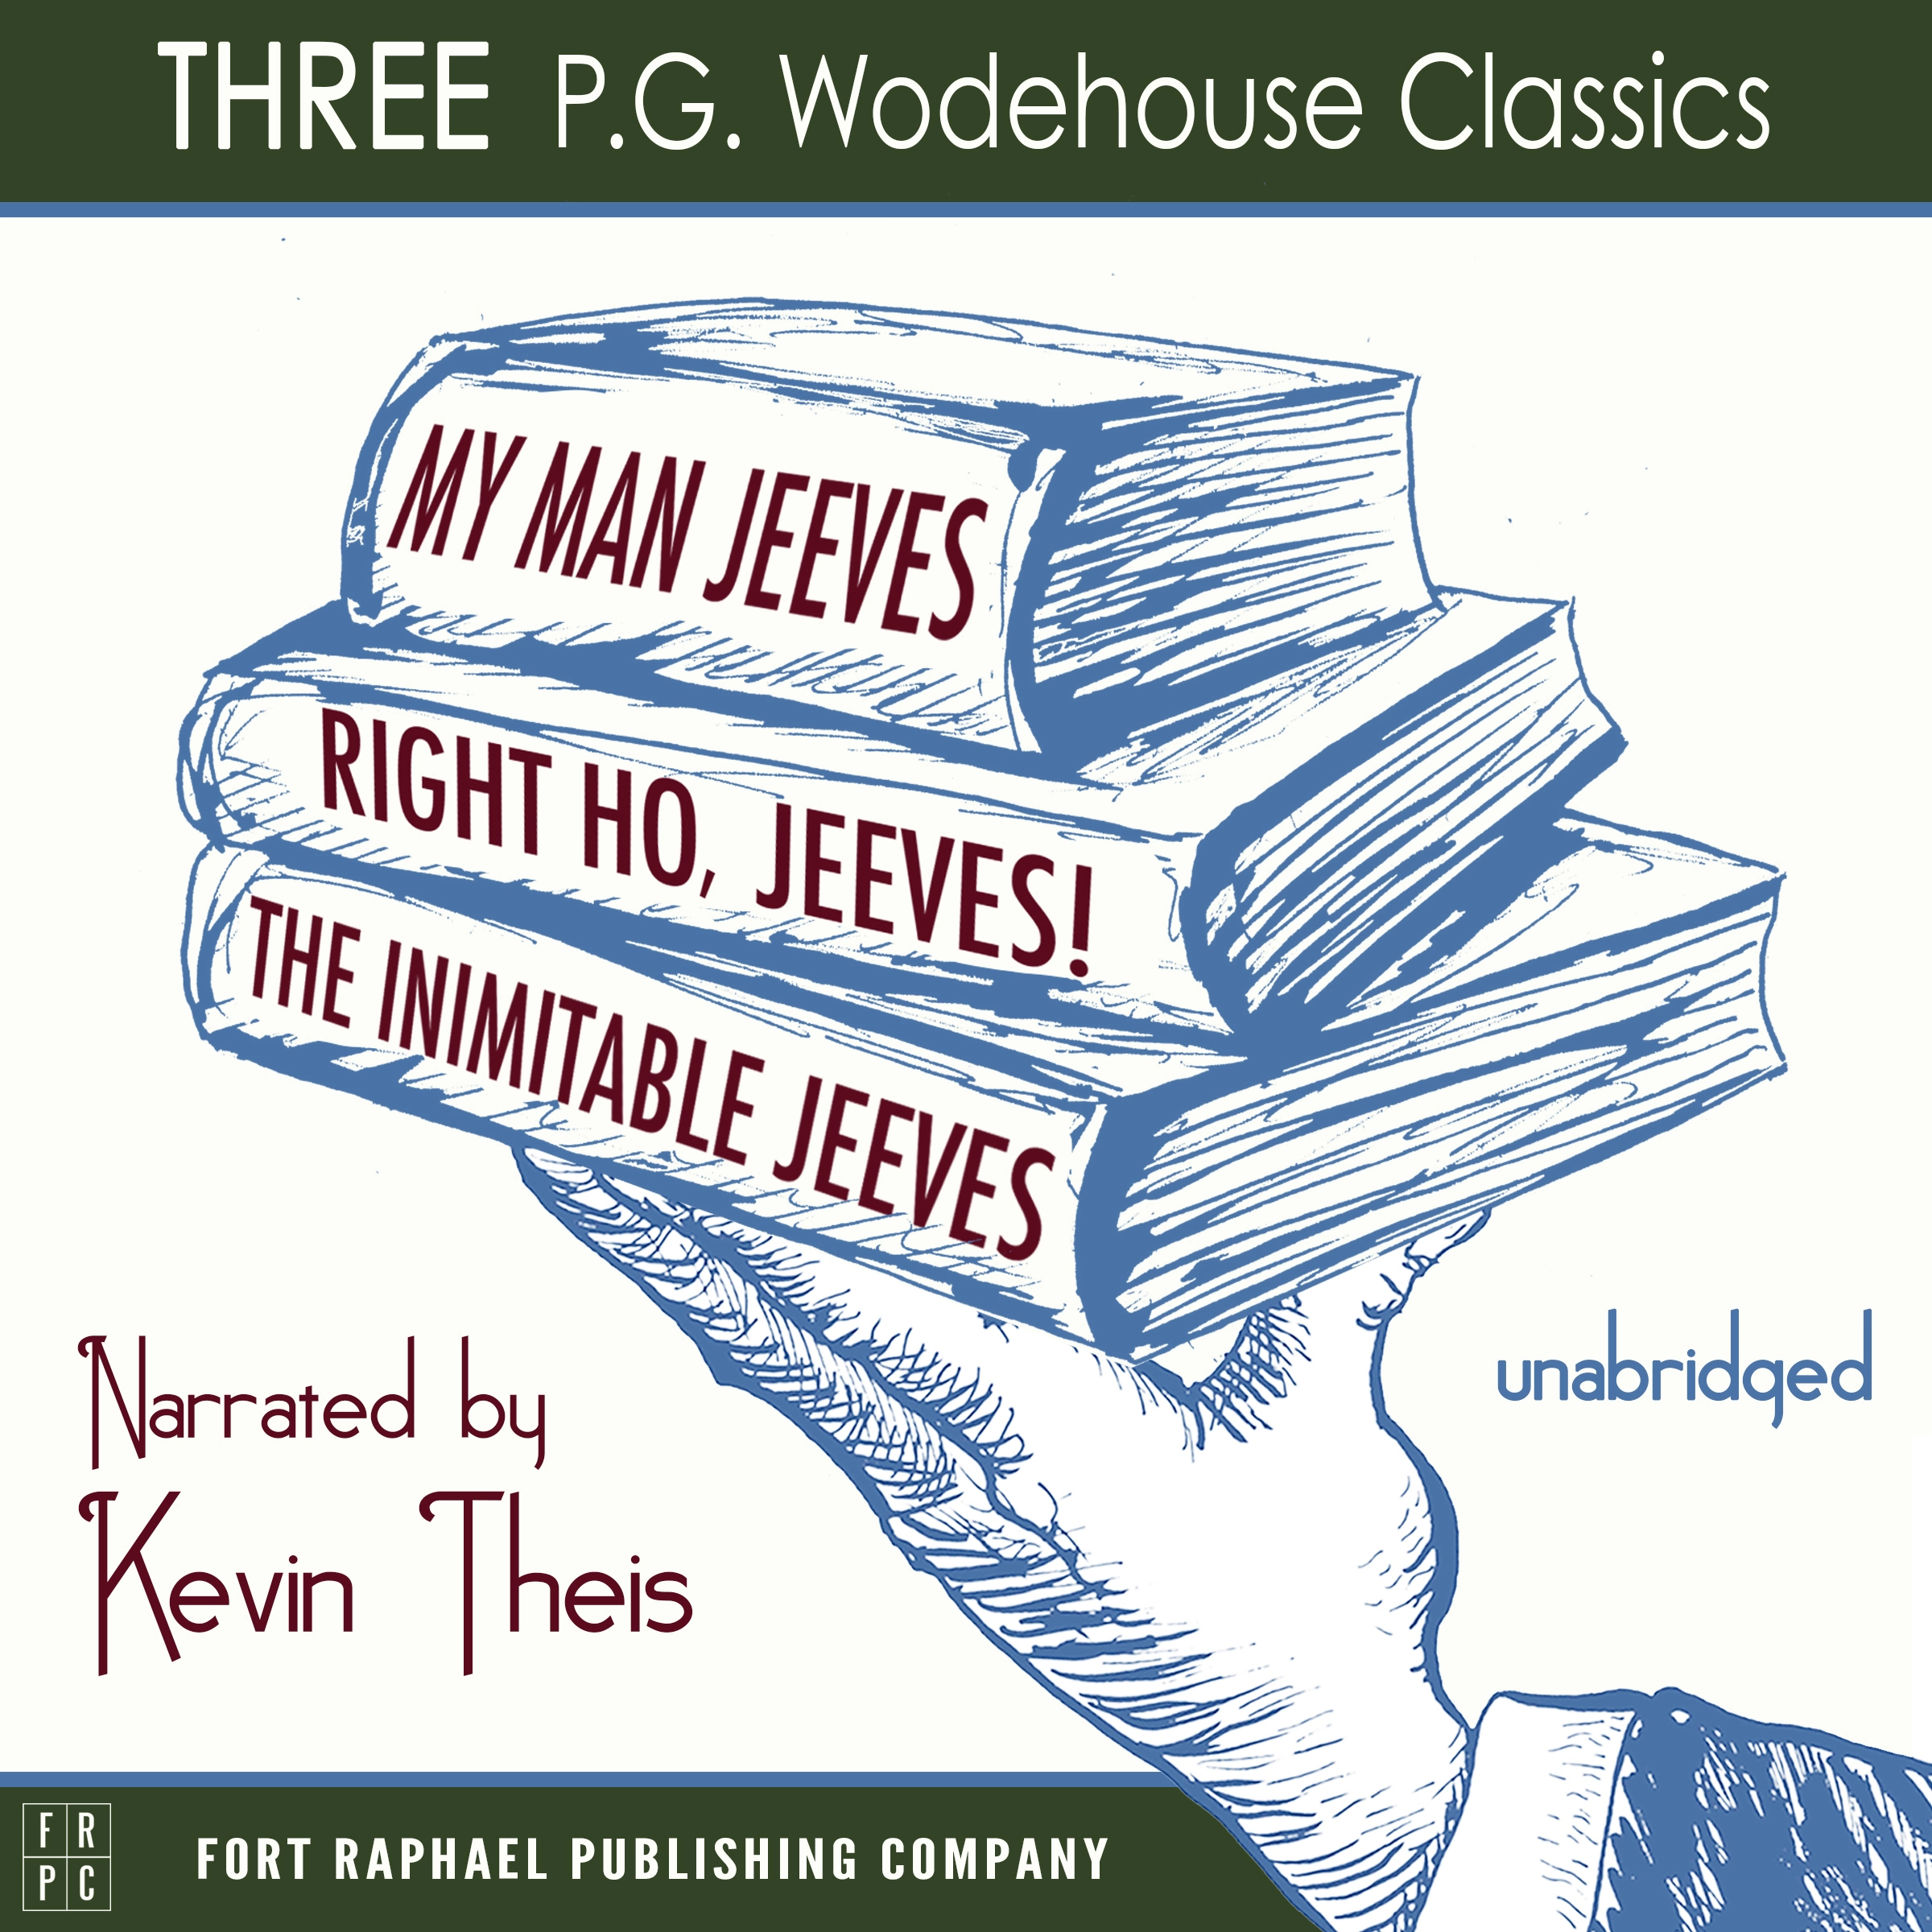 My Man, Jeeves, The Inimitable Jeeves and Right Ho, Jeeves - THREE P.G. Wodehouse Classics! - Unabridged Audiobook by P.G. Wodehouse